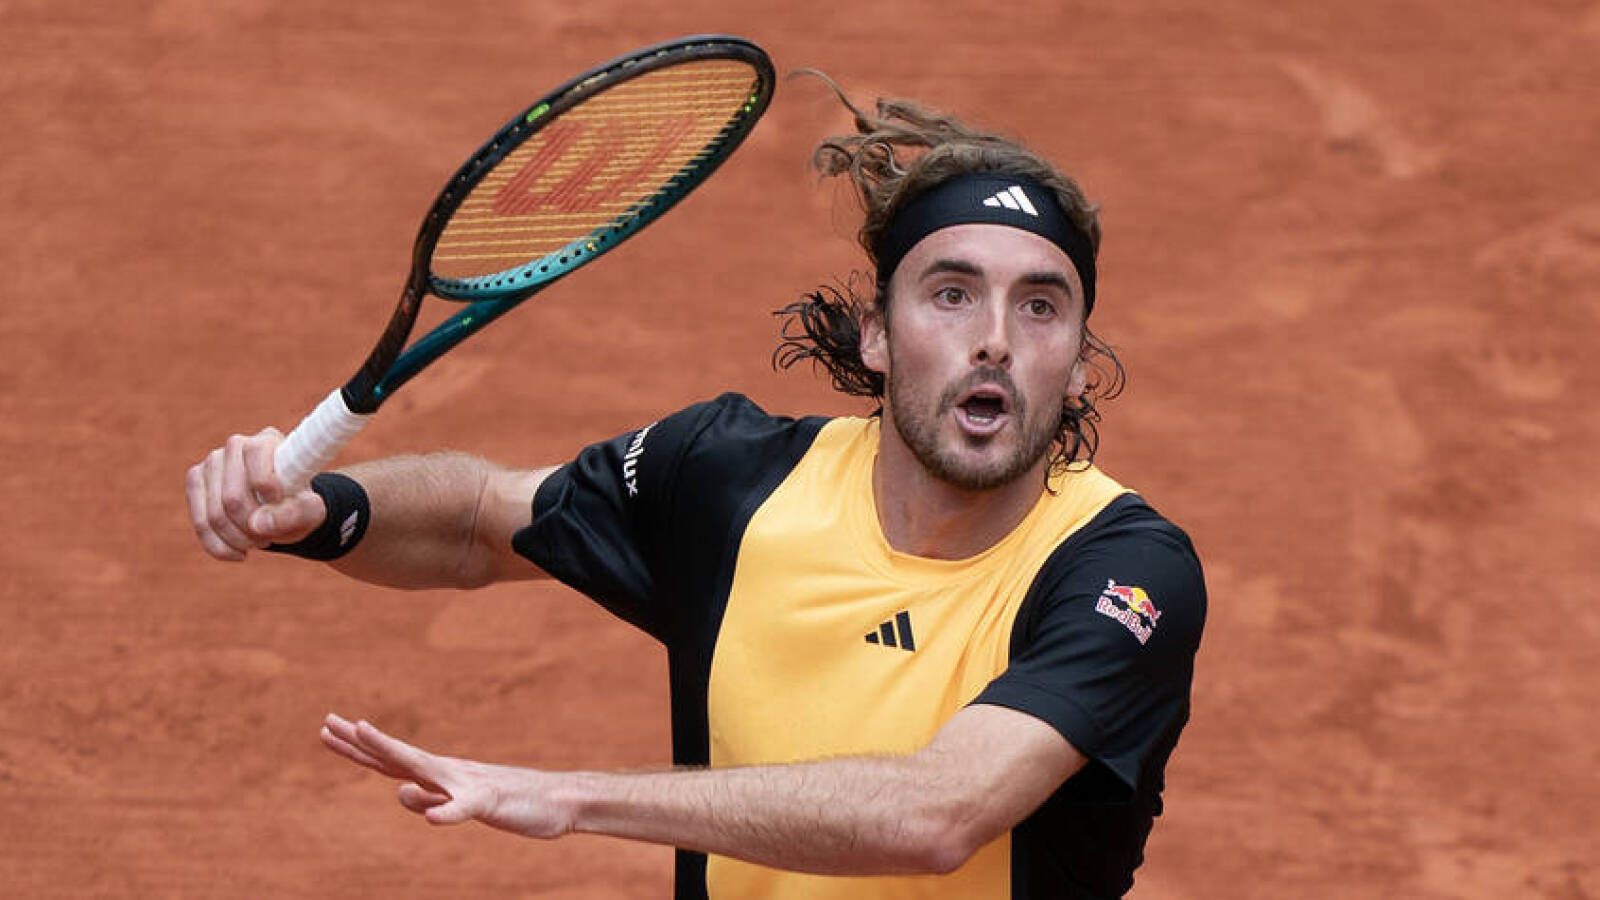 Stefano Tsitsipas’ 4-Set Comeback French Open Victory Books Exciting Revenge Match With Spanish Superstar